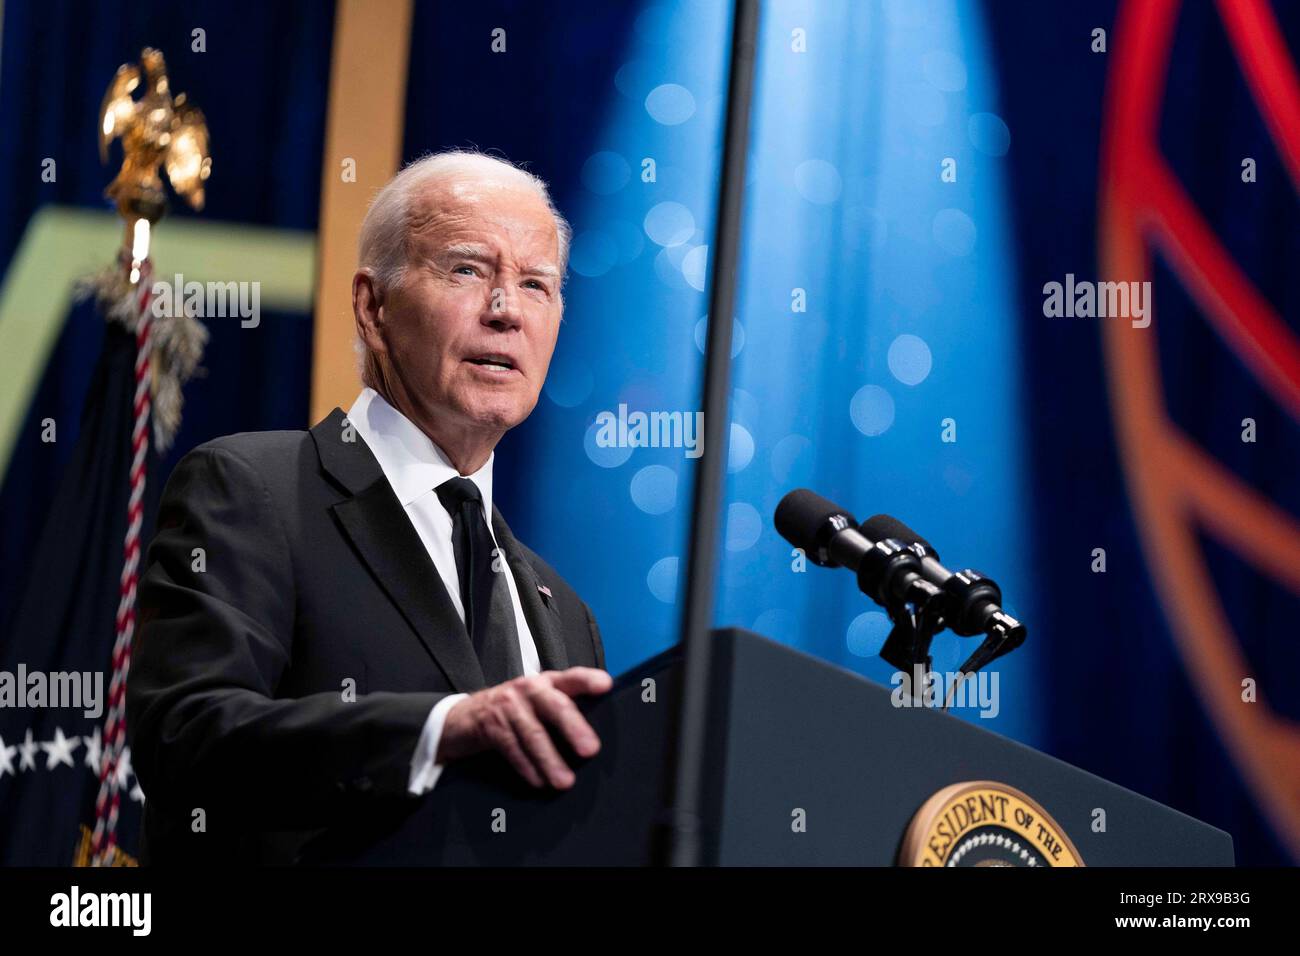 Washington, United States. 23rd Sep, 2023. US President Joe Biden speaks during the 2023 Phoenix Awards Dinner at the Washington Convention Center in Washington, DC on Saturday, September 23, 2023. The dinner, hosted by the Congressional Black Caucus, recognizes individuals who have impacted the Black community. Photo by Bonnie Cash/UPI Credit: UPI/Alamy Live News Stock Photo